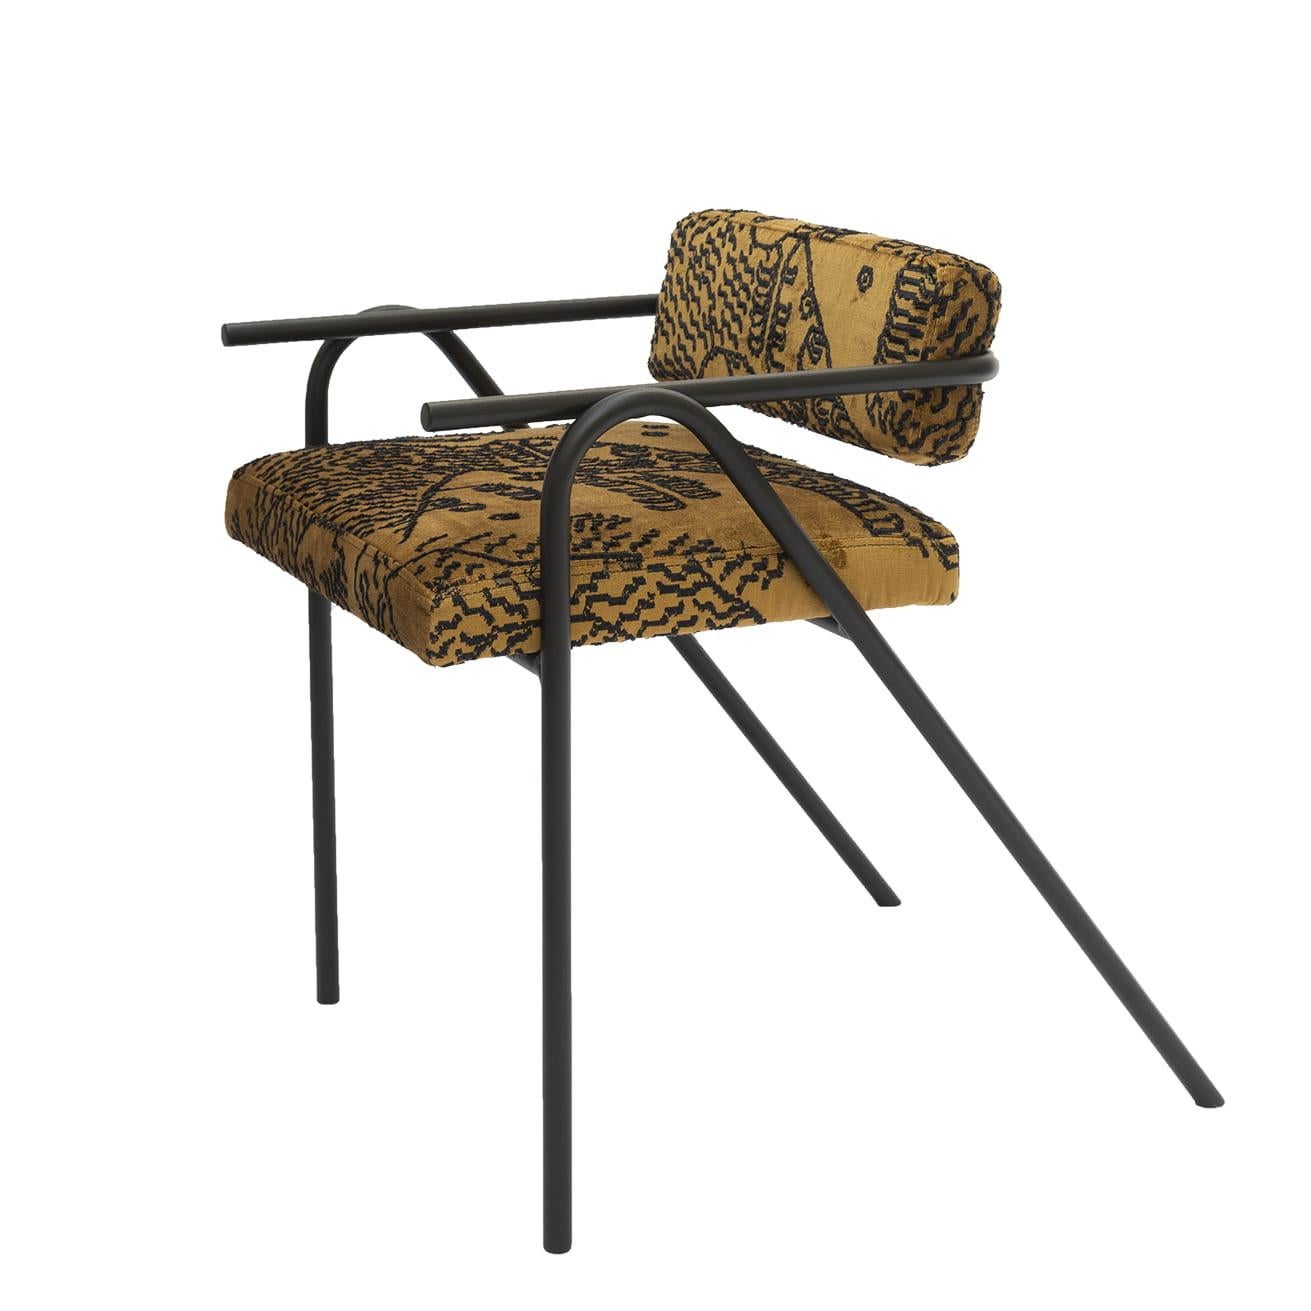 Object 102 Chair by NG Design
Dimensions: W 53 x D 69 x H 71 cm
Materials: Powder Coated Steel, Fabric Rustic Dedar

Also Available: All of objects available in different materials and colors on demand.

The Object 102 Chair is a classic with a